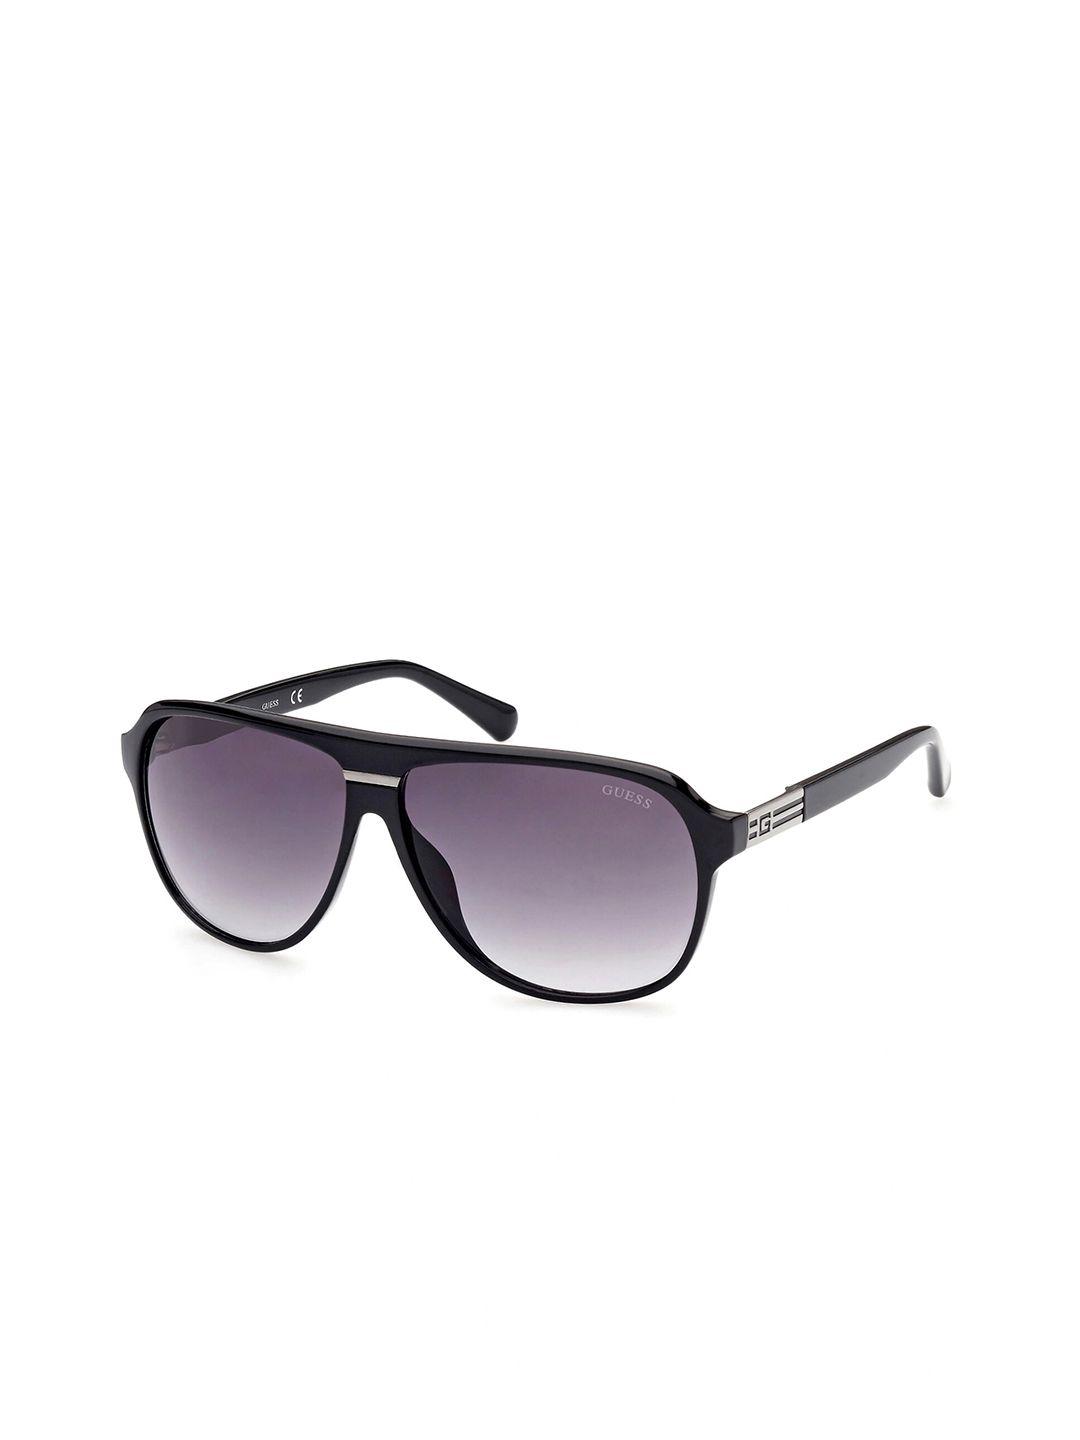 GUESS Aviator Sunglasses with UV Protected Lens